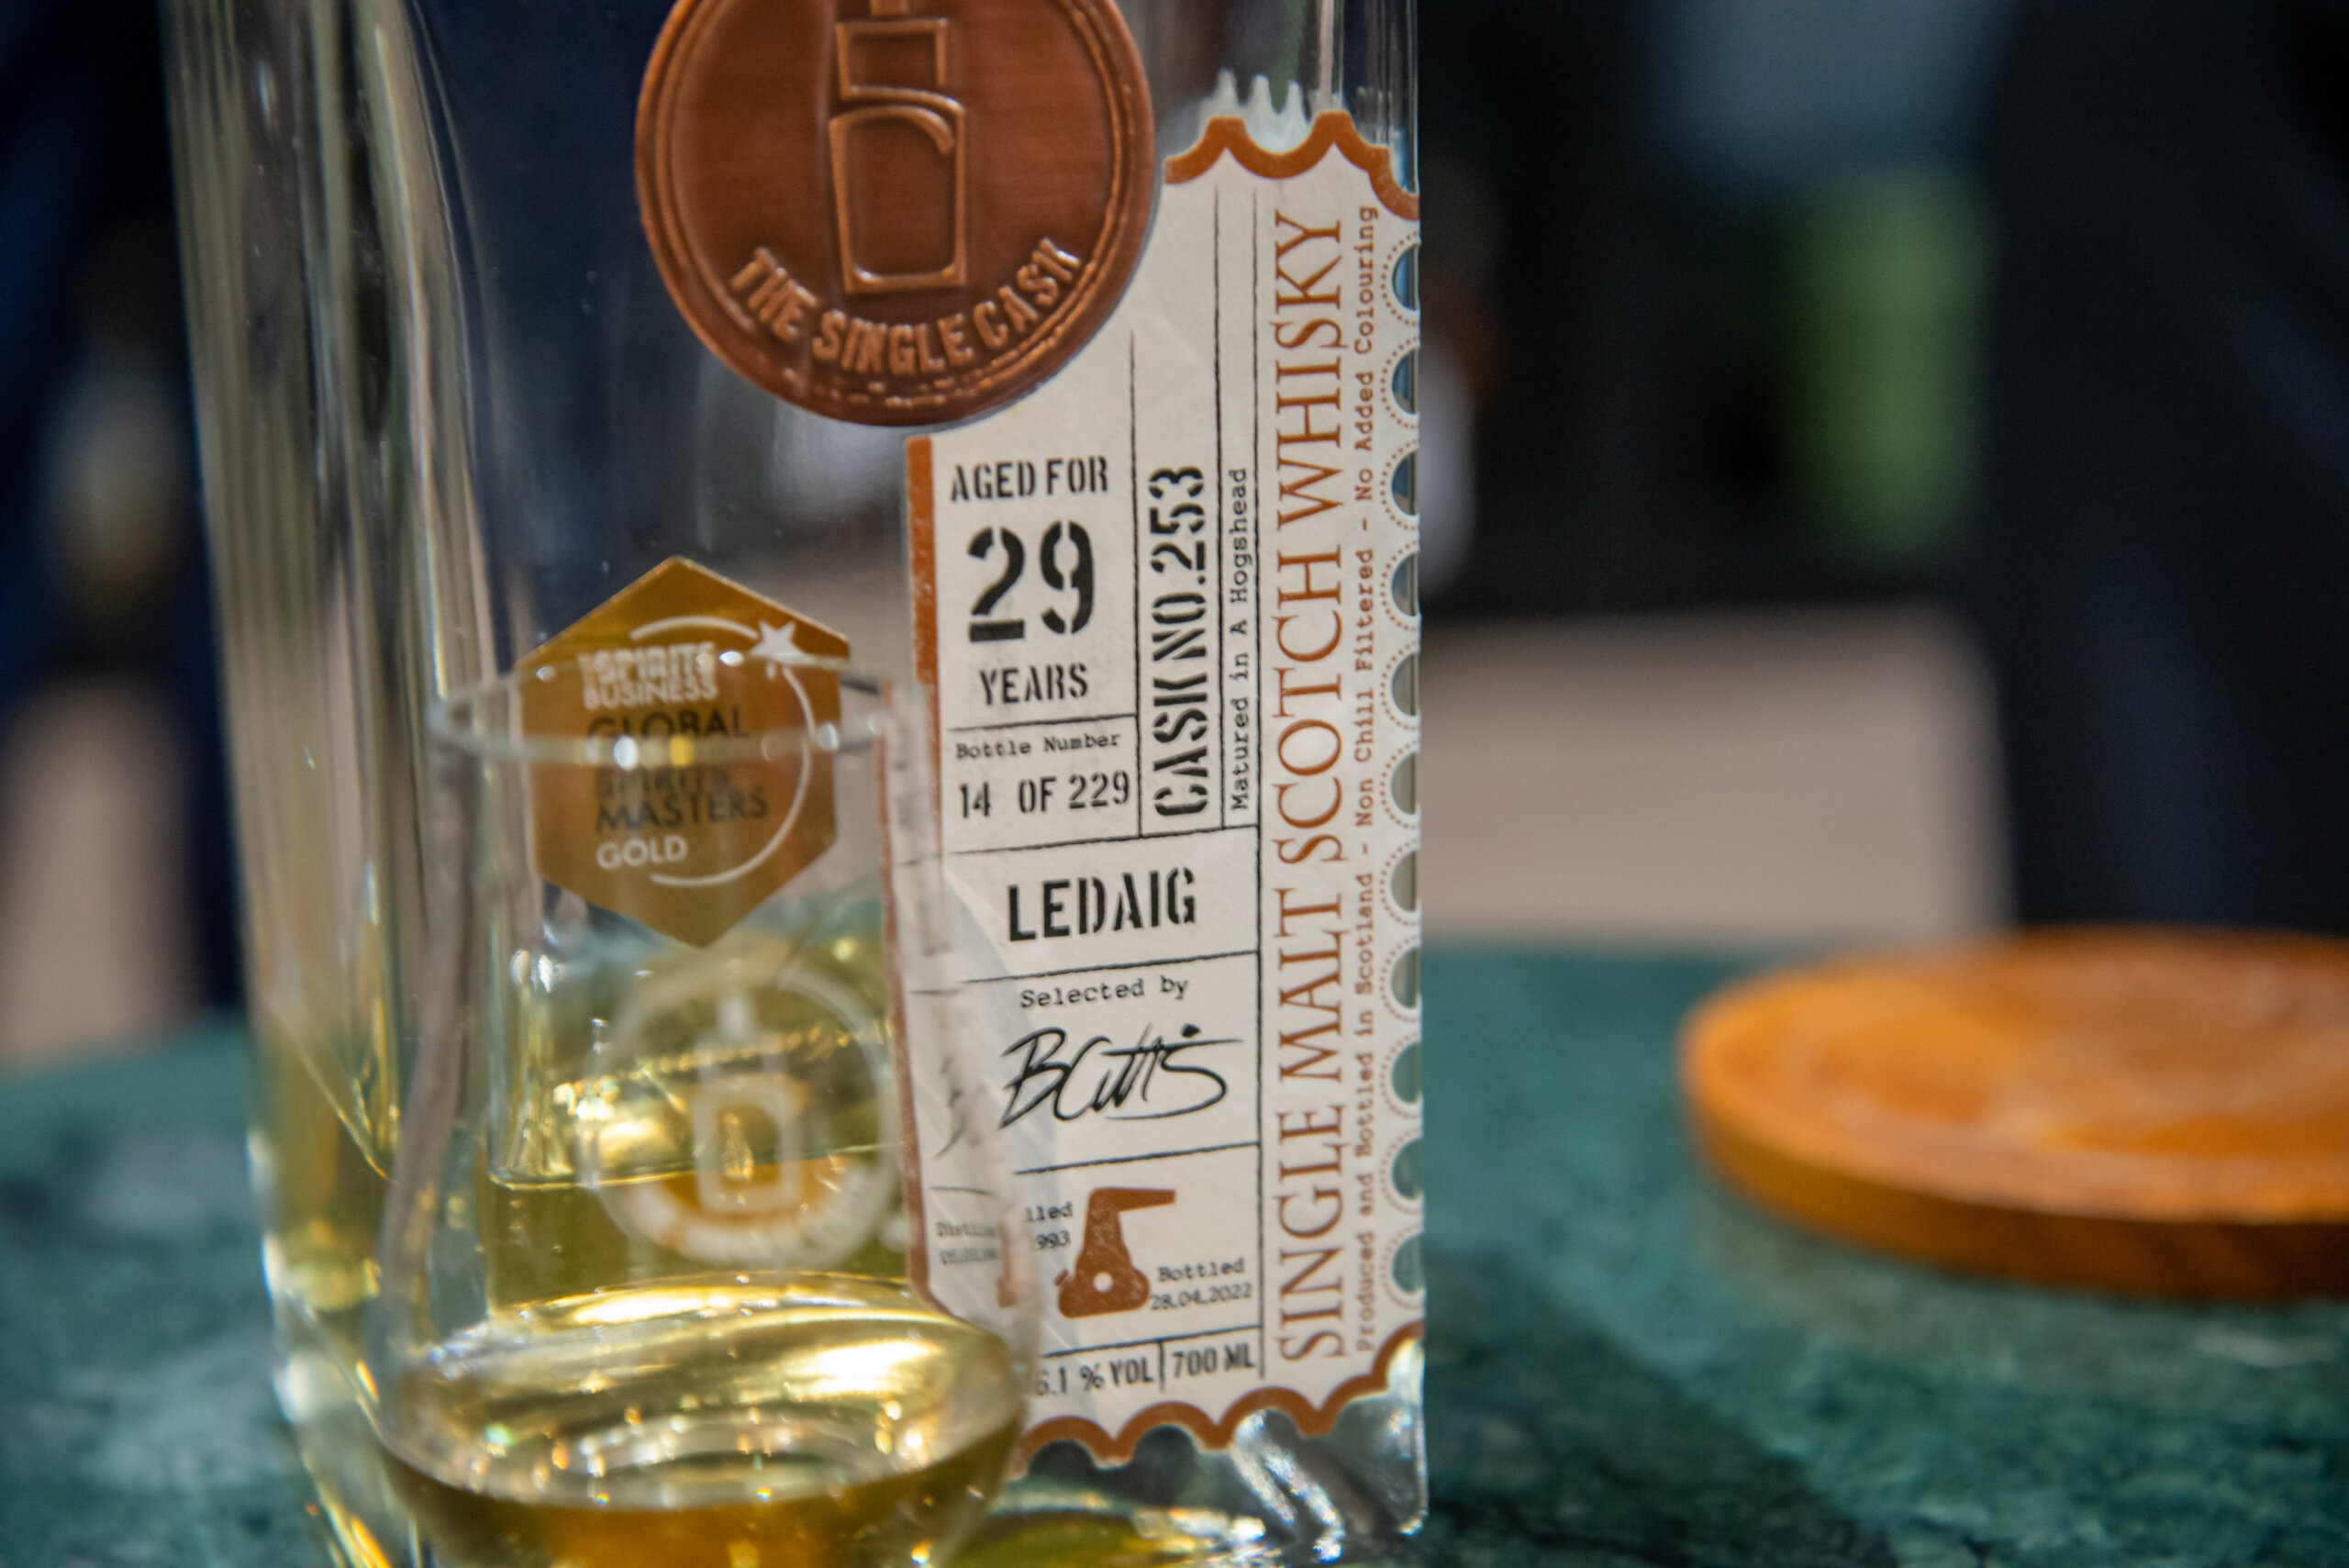 The Single Cask's Ledaig 29 years old (Cask no. 253). A delightful flavour of smokiness, tropical fruit notes, and a subtle hint of saltiness."